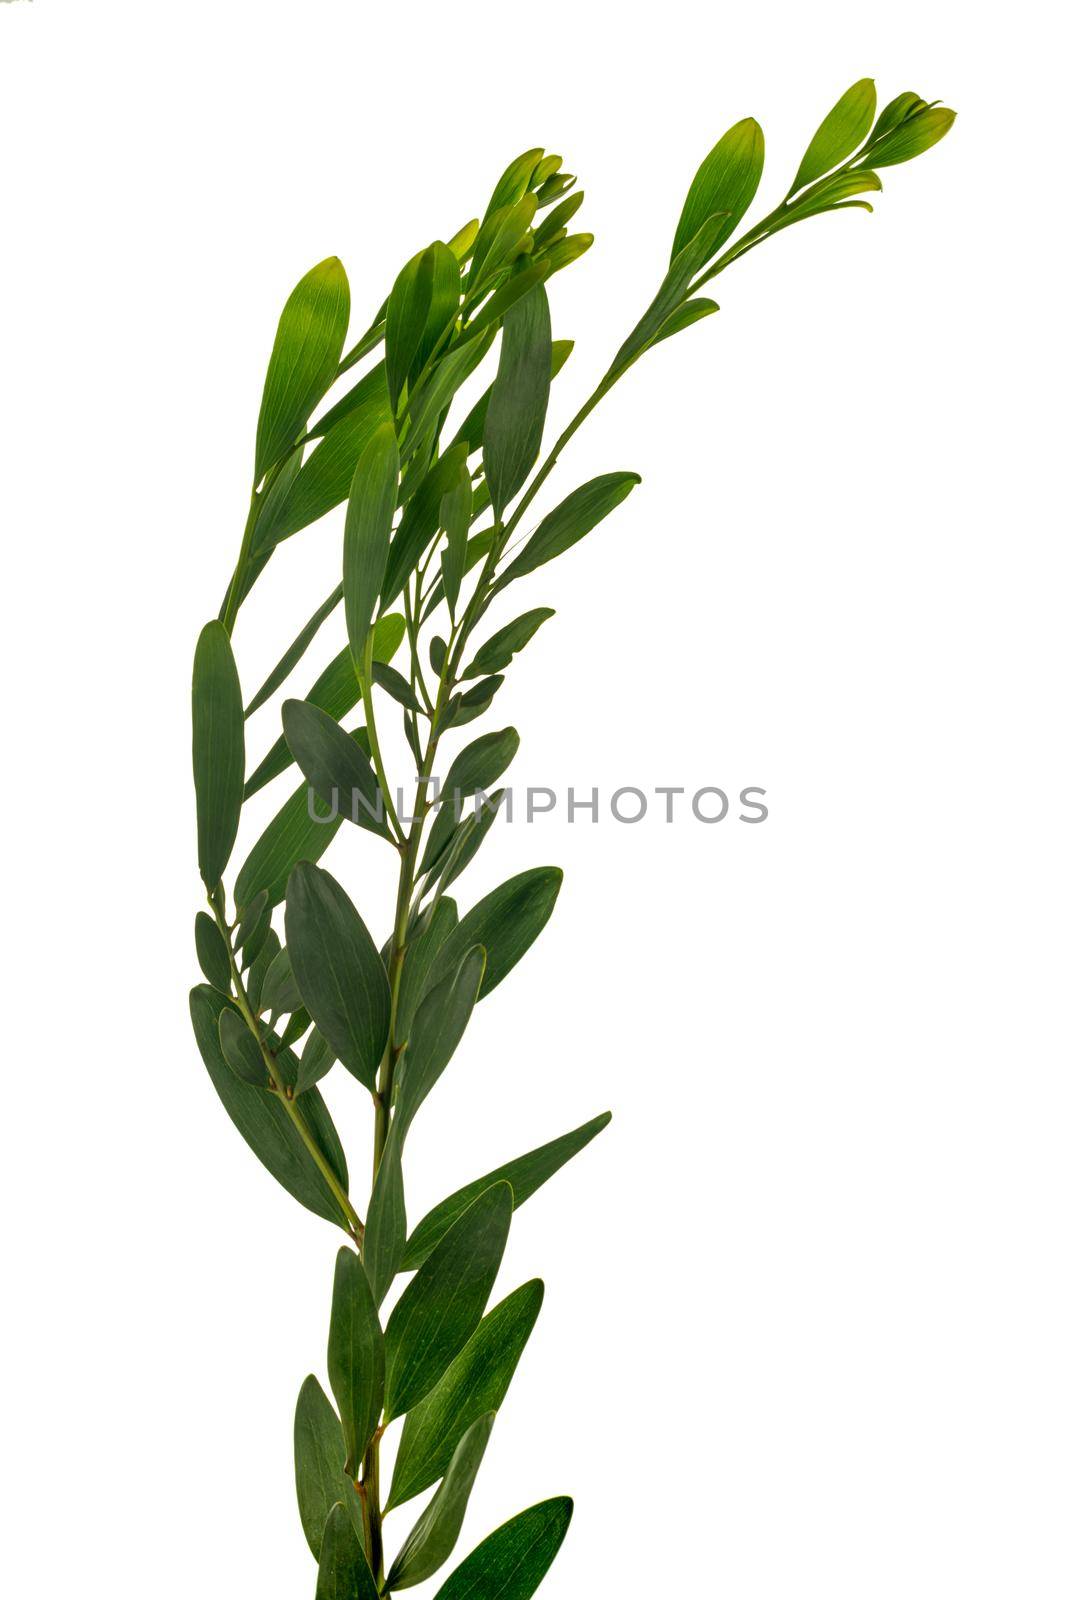 Acacia longifolia is an evergreen tree that form dense stands. It tolerates a variety of conditions including coastal and windy areas. Makes an excellent windbreak. Branch isolated on white background.